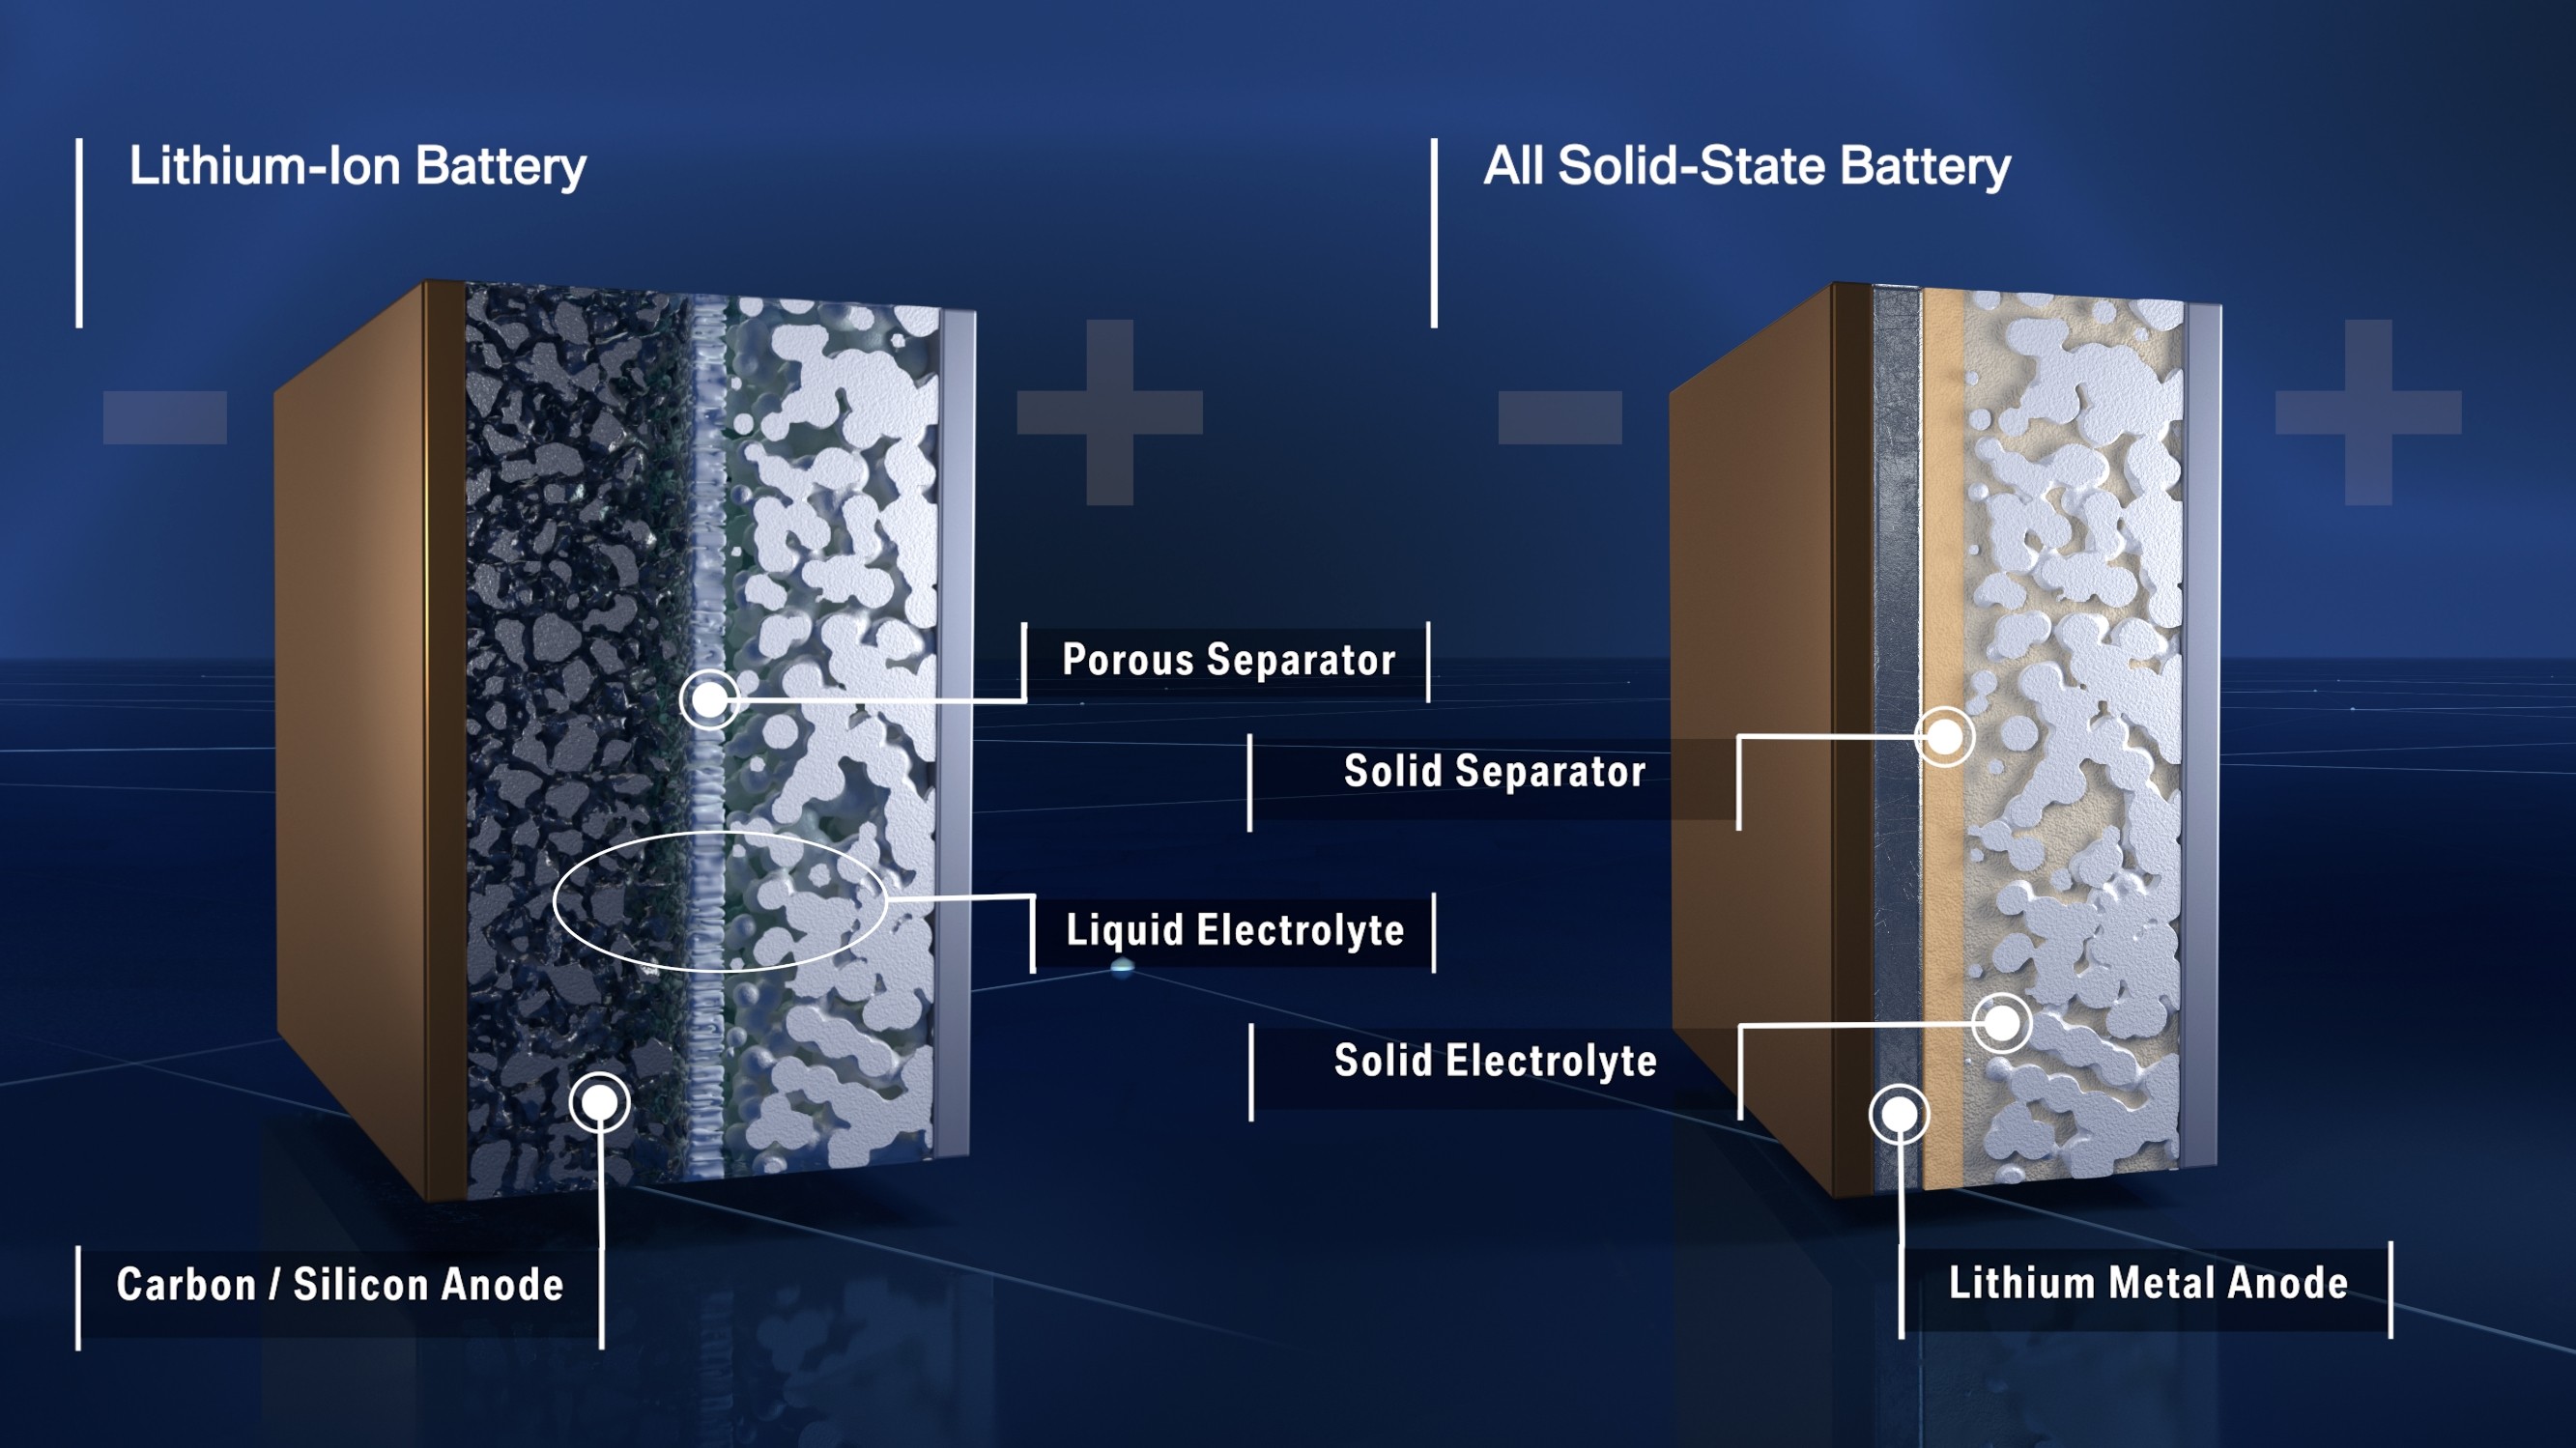 What are solid-state batteries?